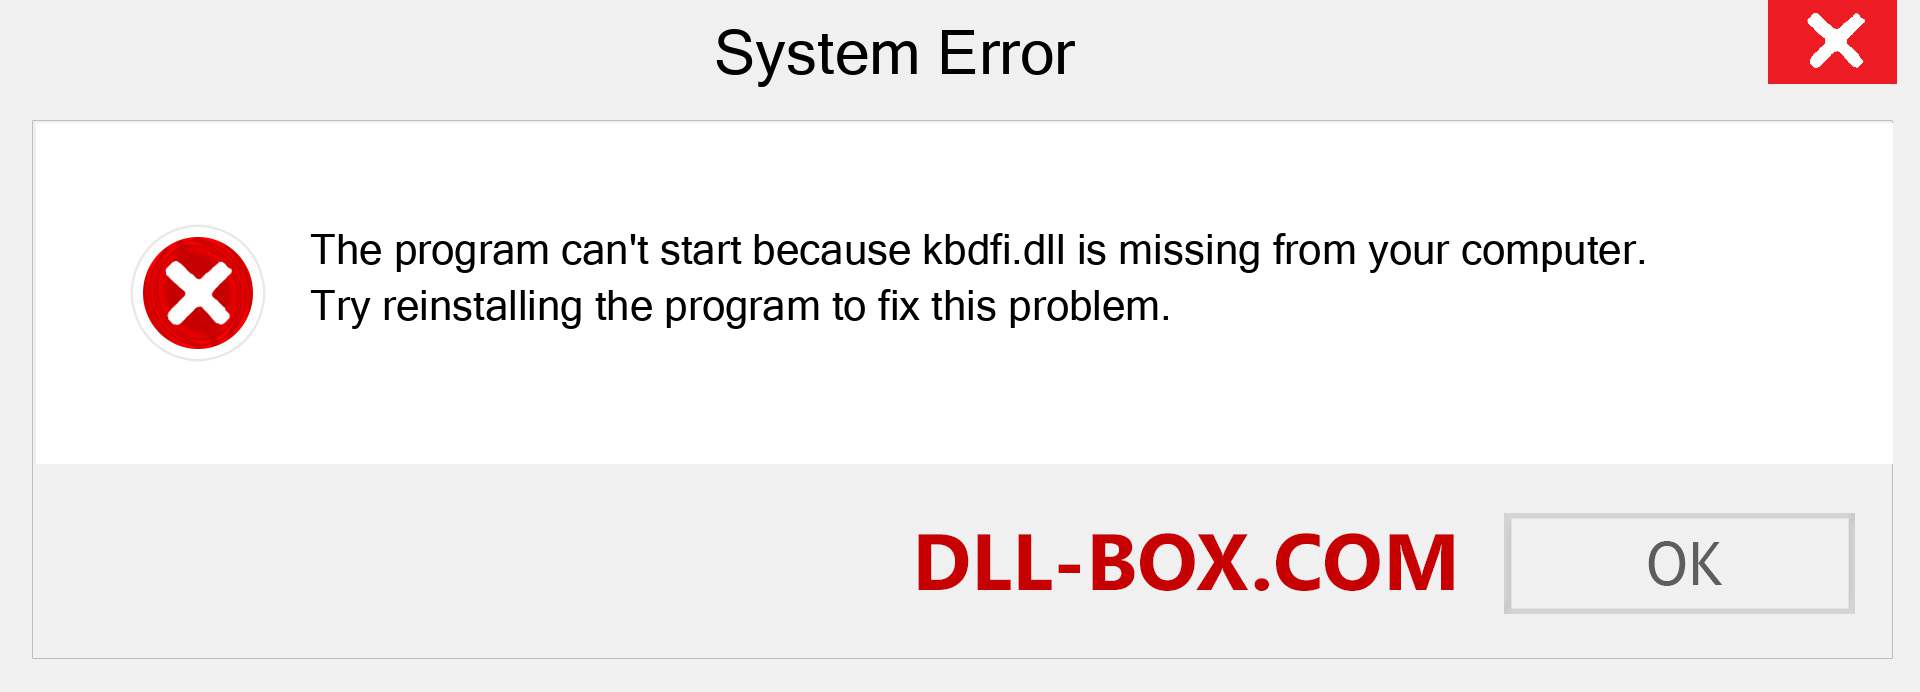  kbdfi.dll file is missing?. Download for Windows 7, 8, 10 - Fix  kbdfi dll Missing Error on Windows, photos, images